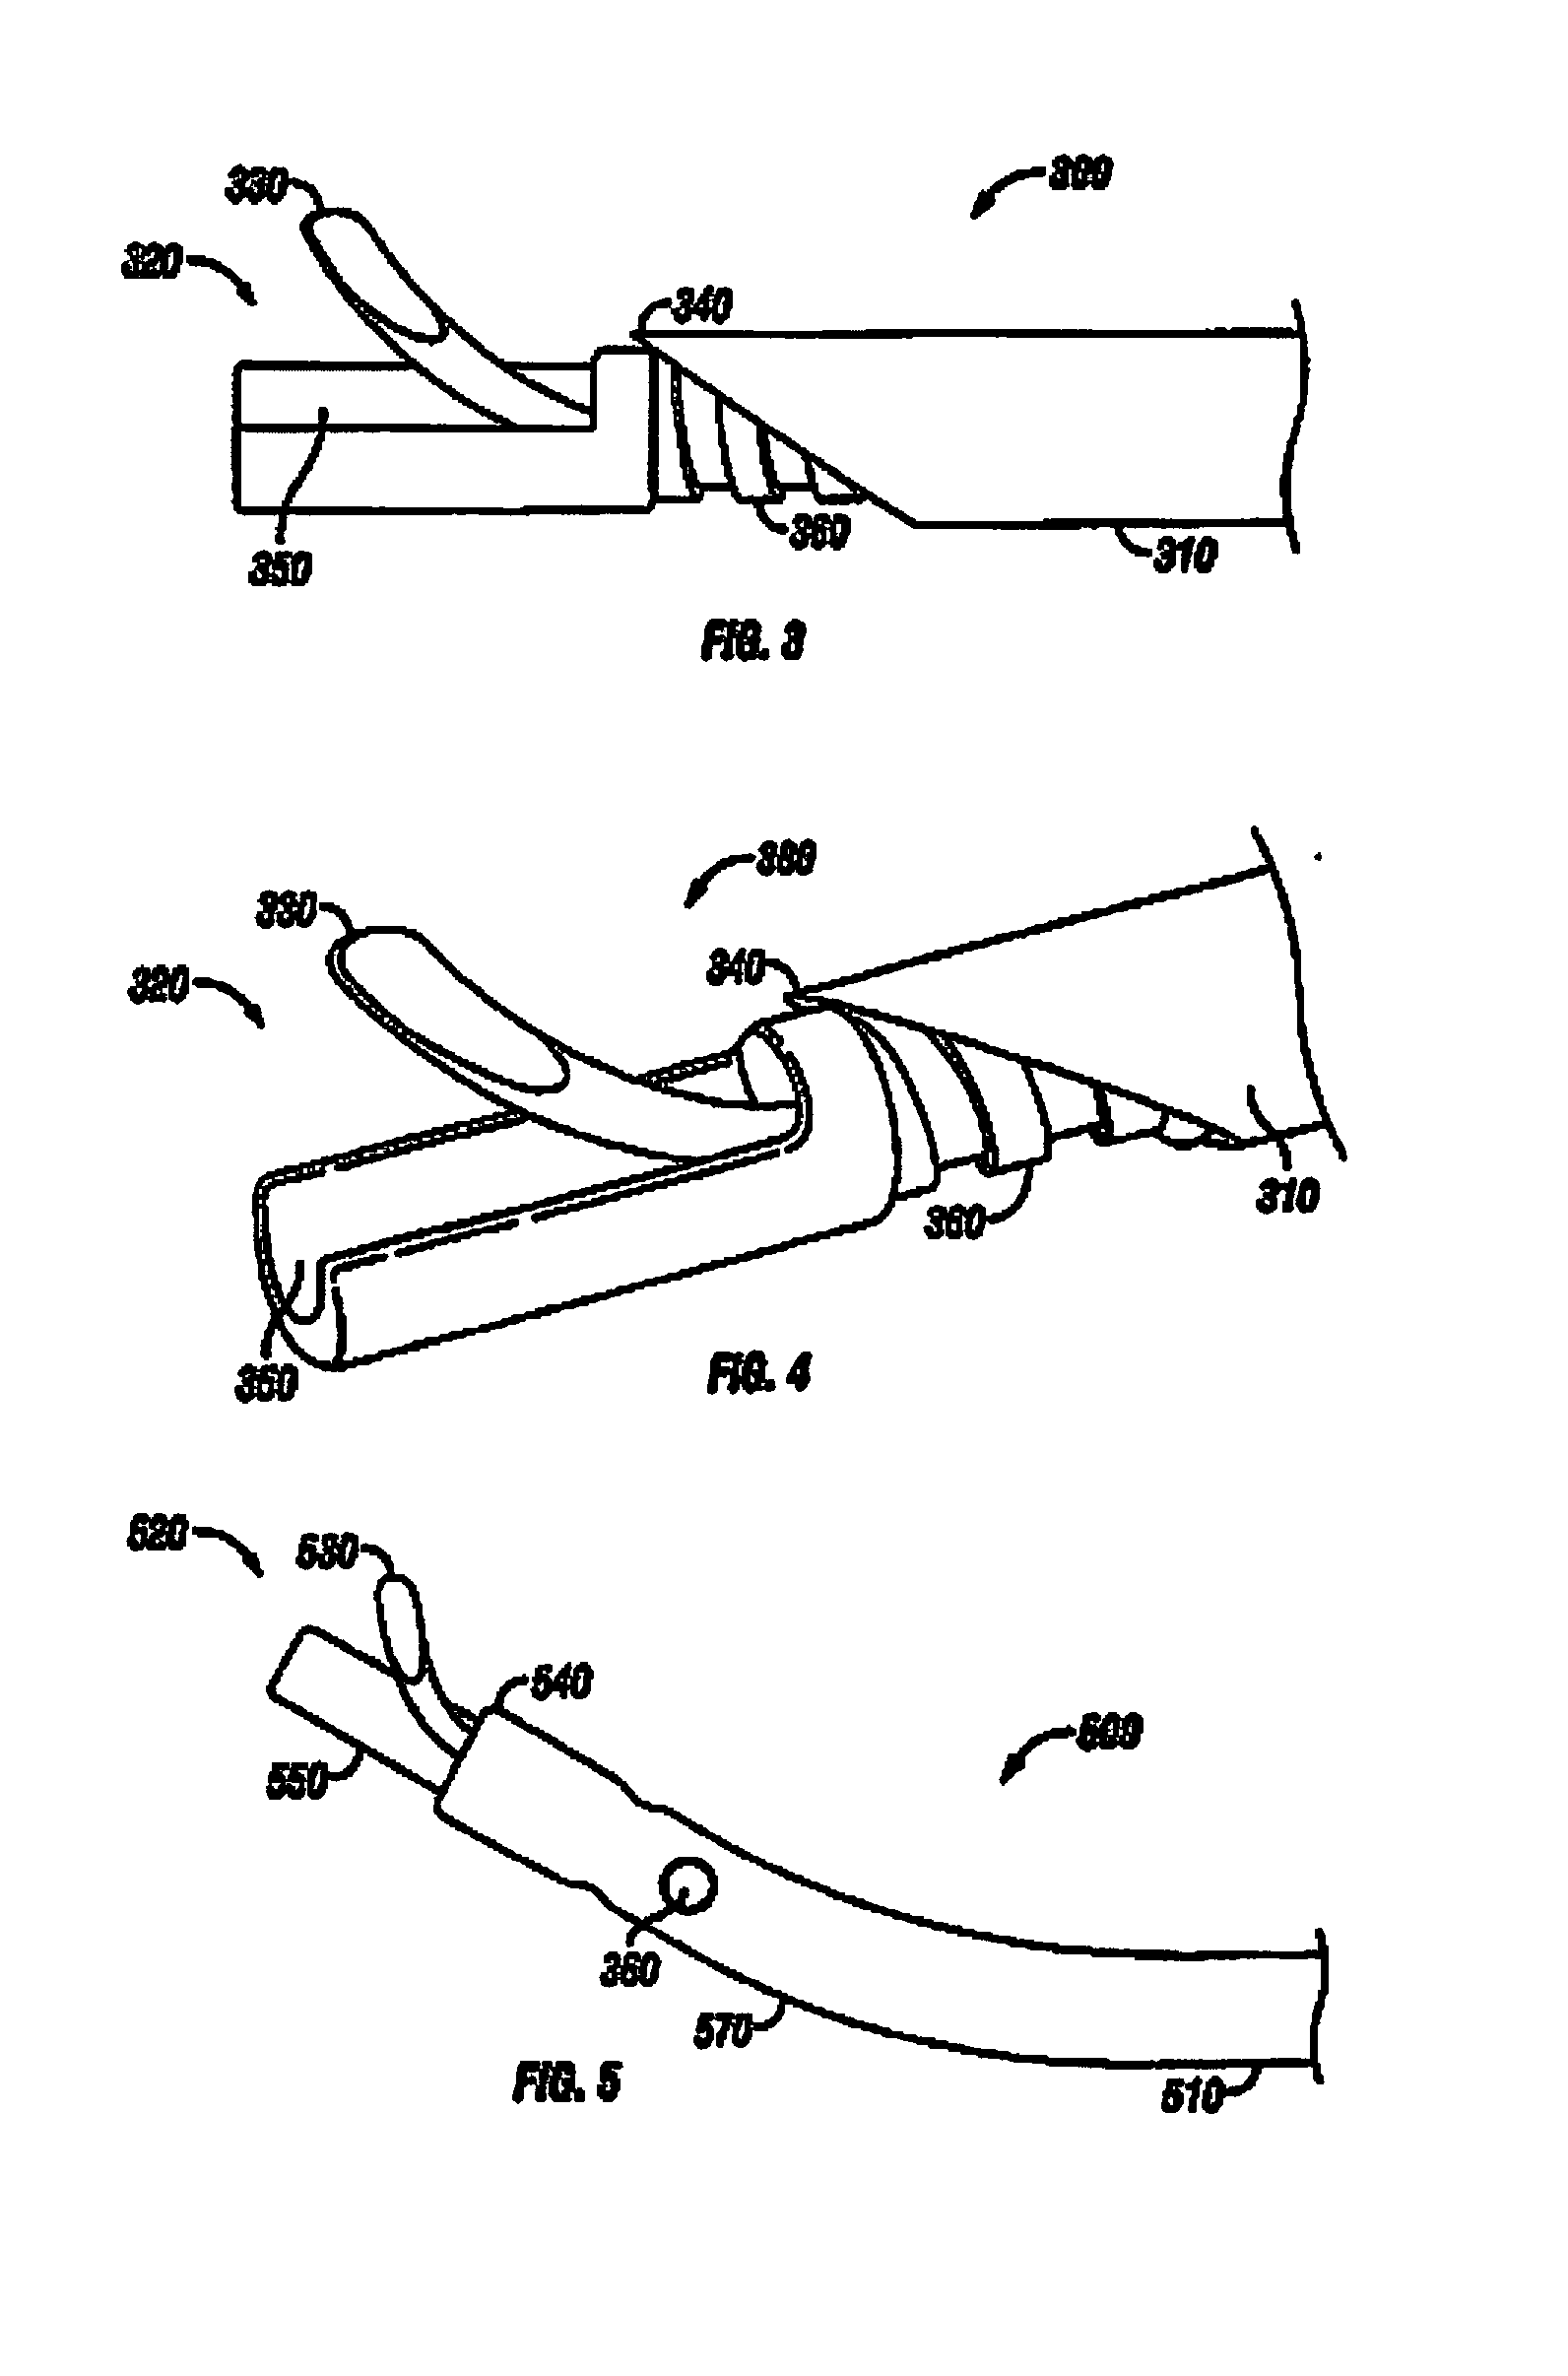 Surgical disc removal tool